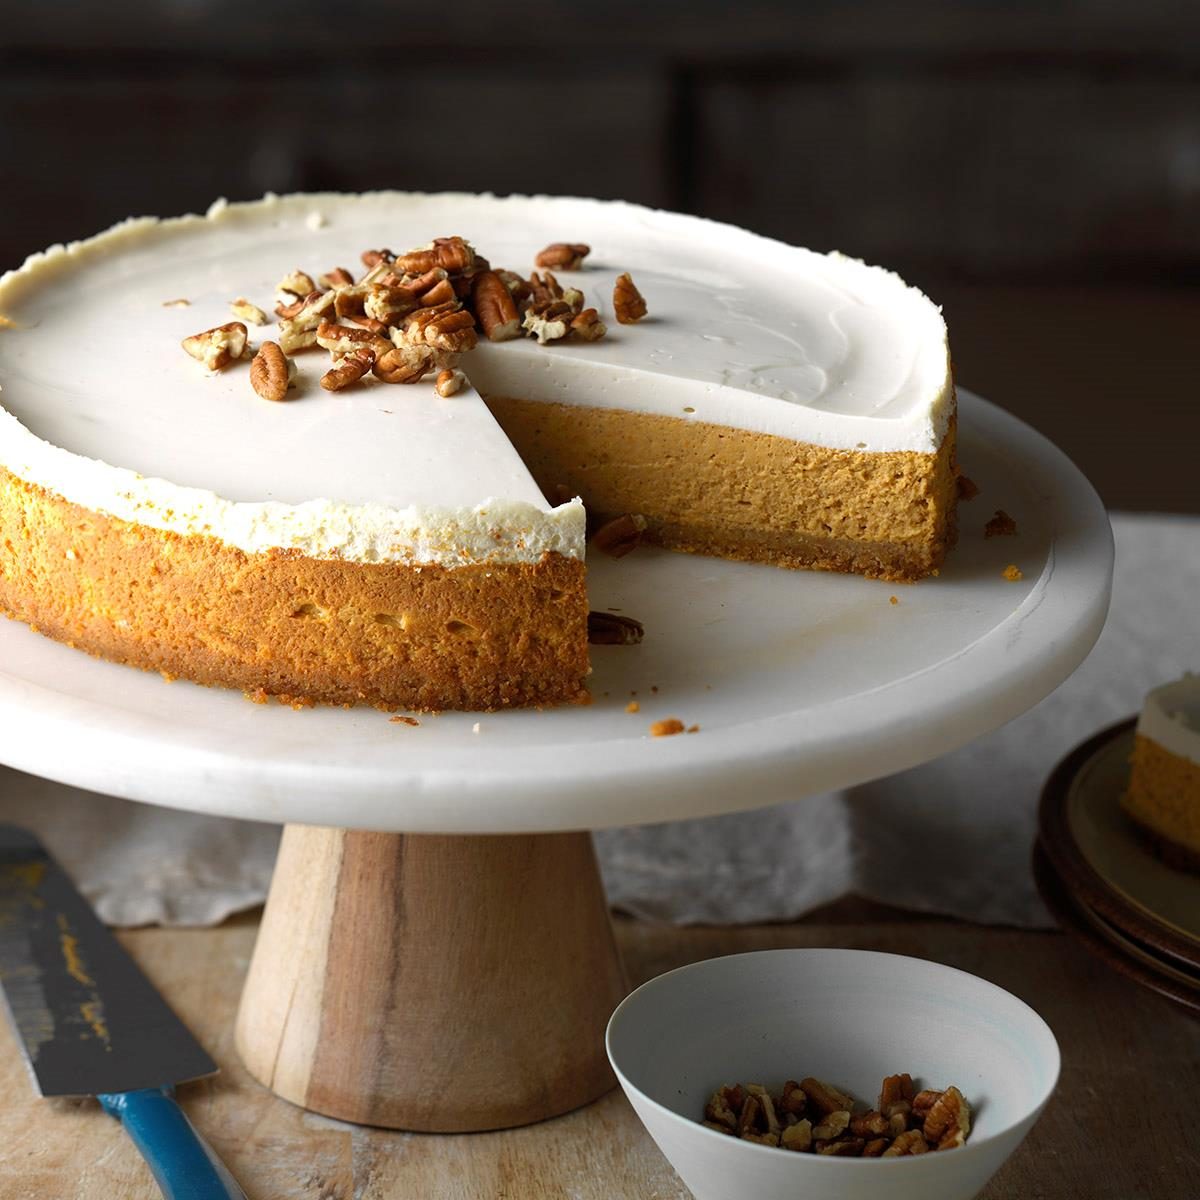 Inspired by: The Cheesecake Factory’s Pumpkin Cheesecake